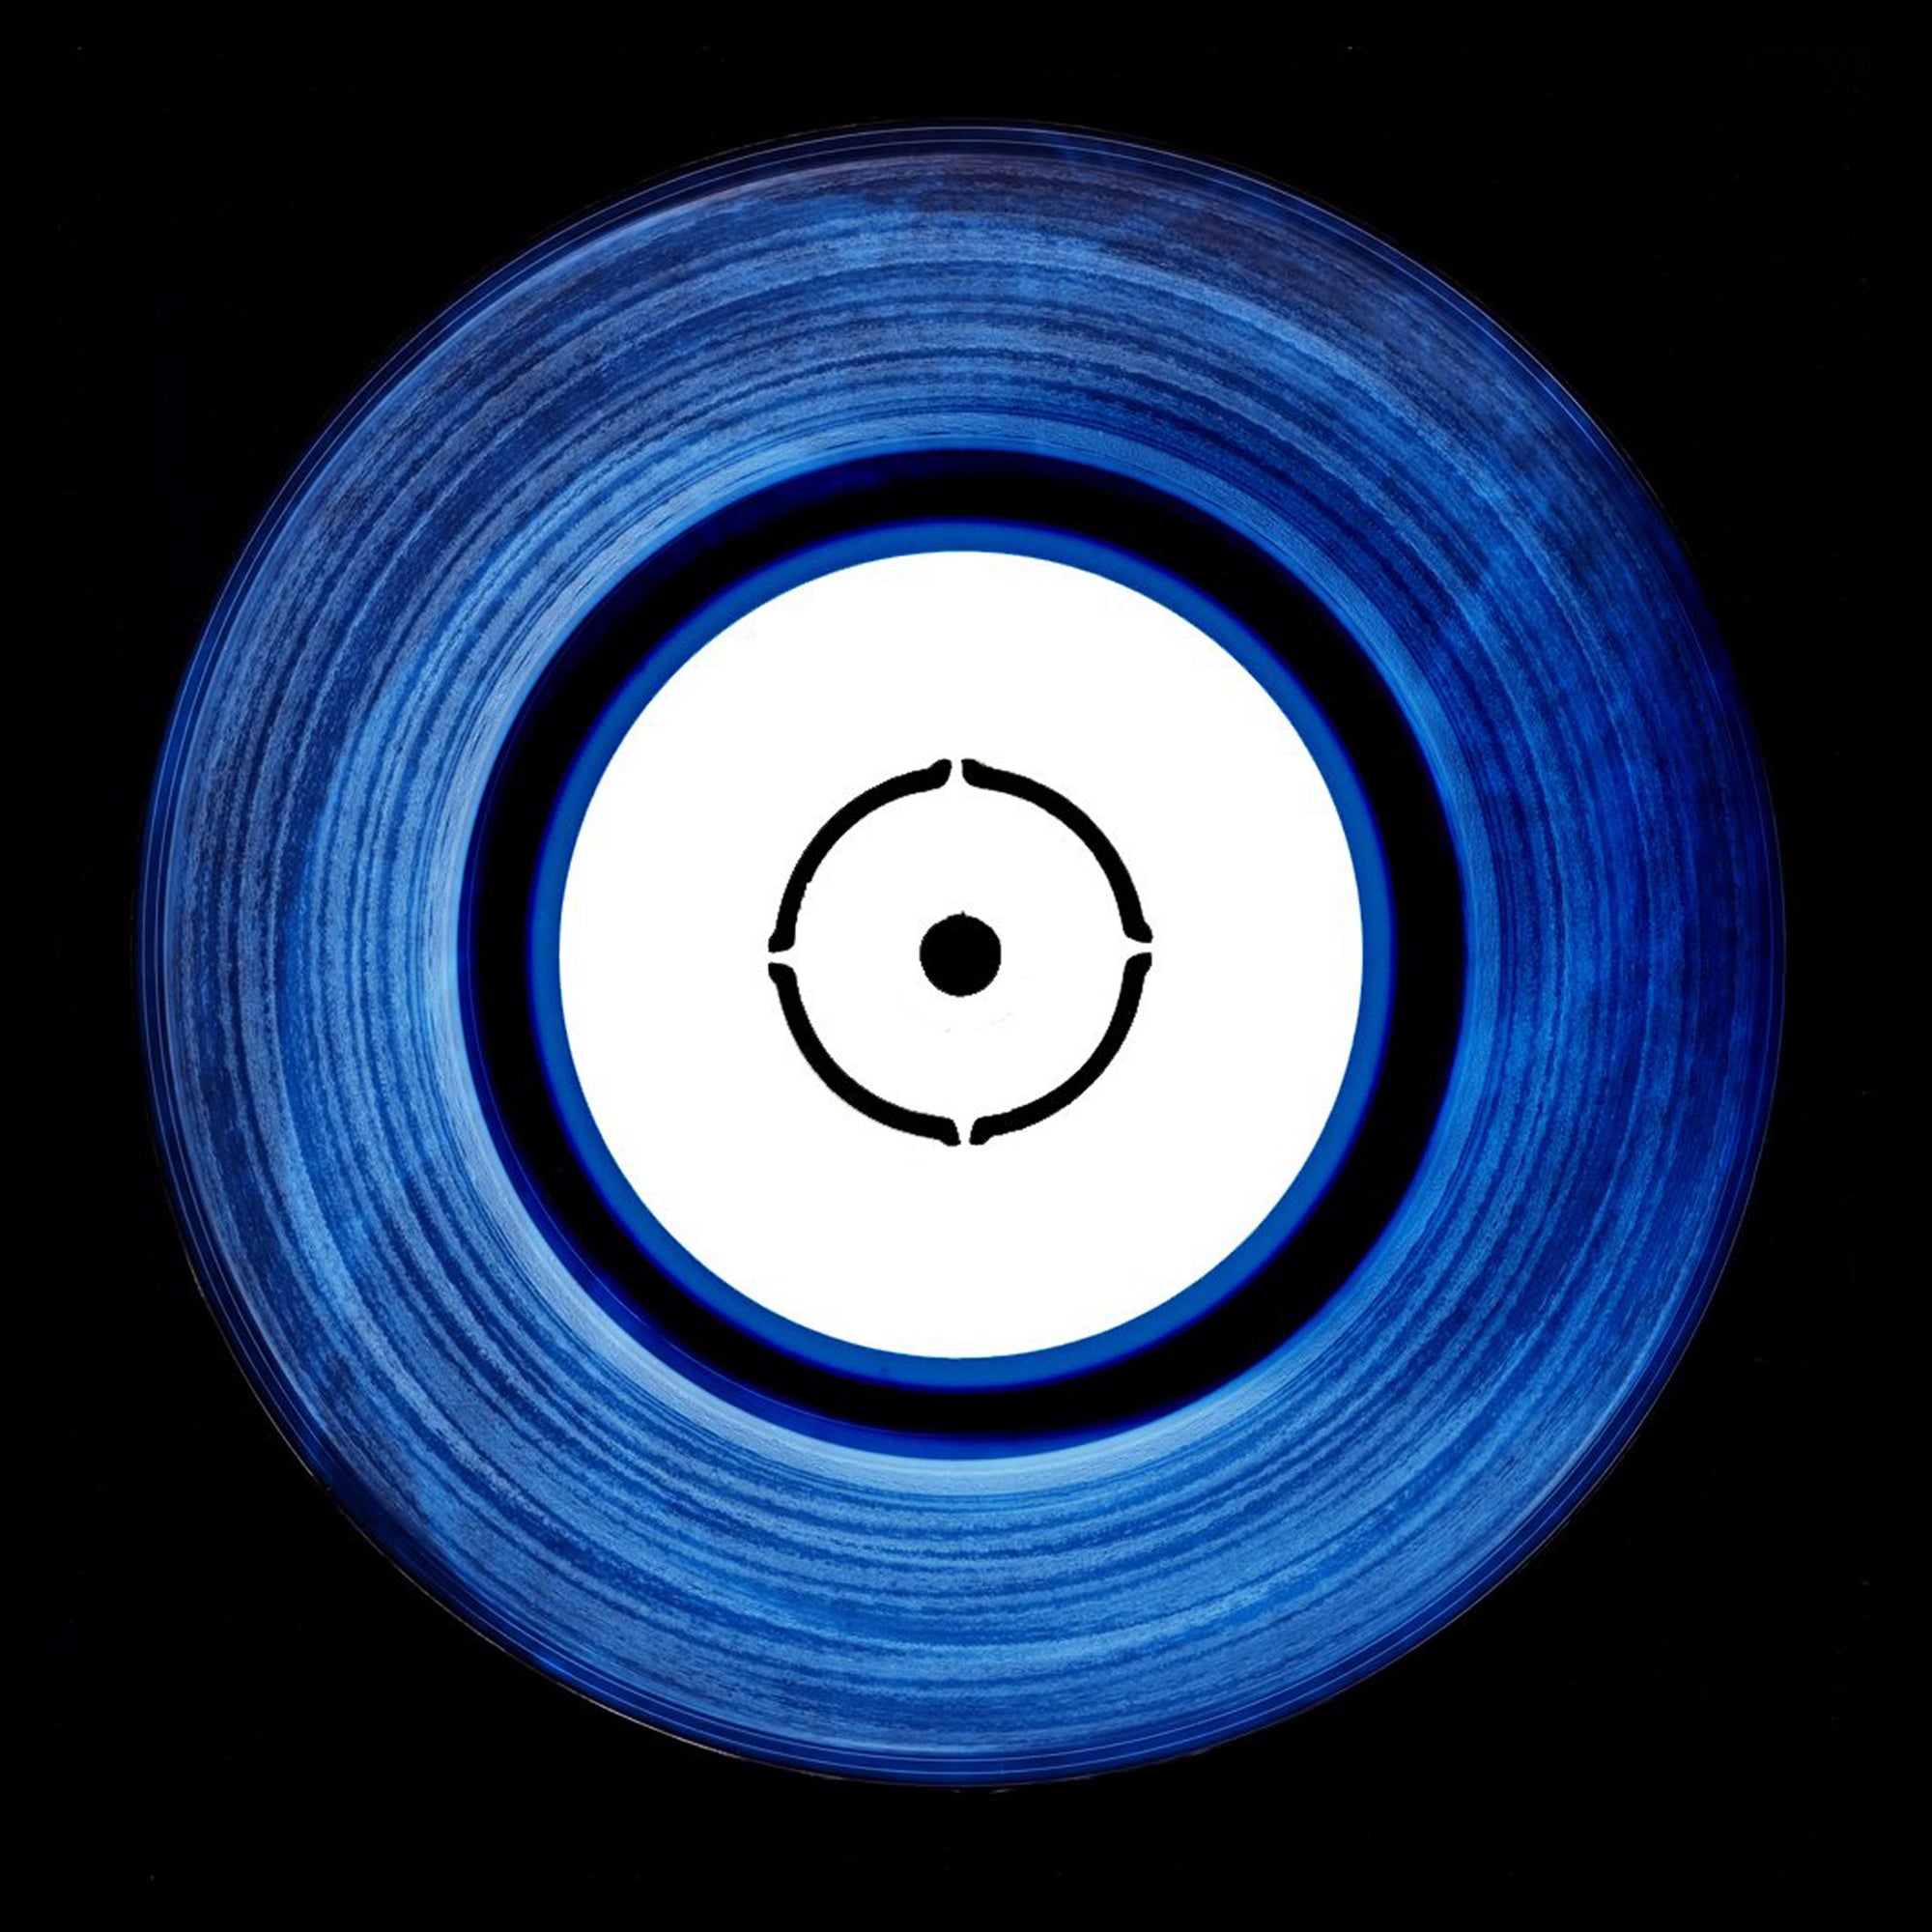 Vinyl Collection 'White Label'. Acclaimed contemporary photographers, Richard Heeps and Natasha Heidler have collaborated to make this beautifully mesmerising collection. A celebration of the vinyl record and analogue technology, which reflects the artists practice within photography.